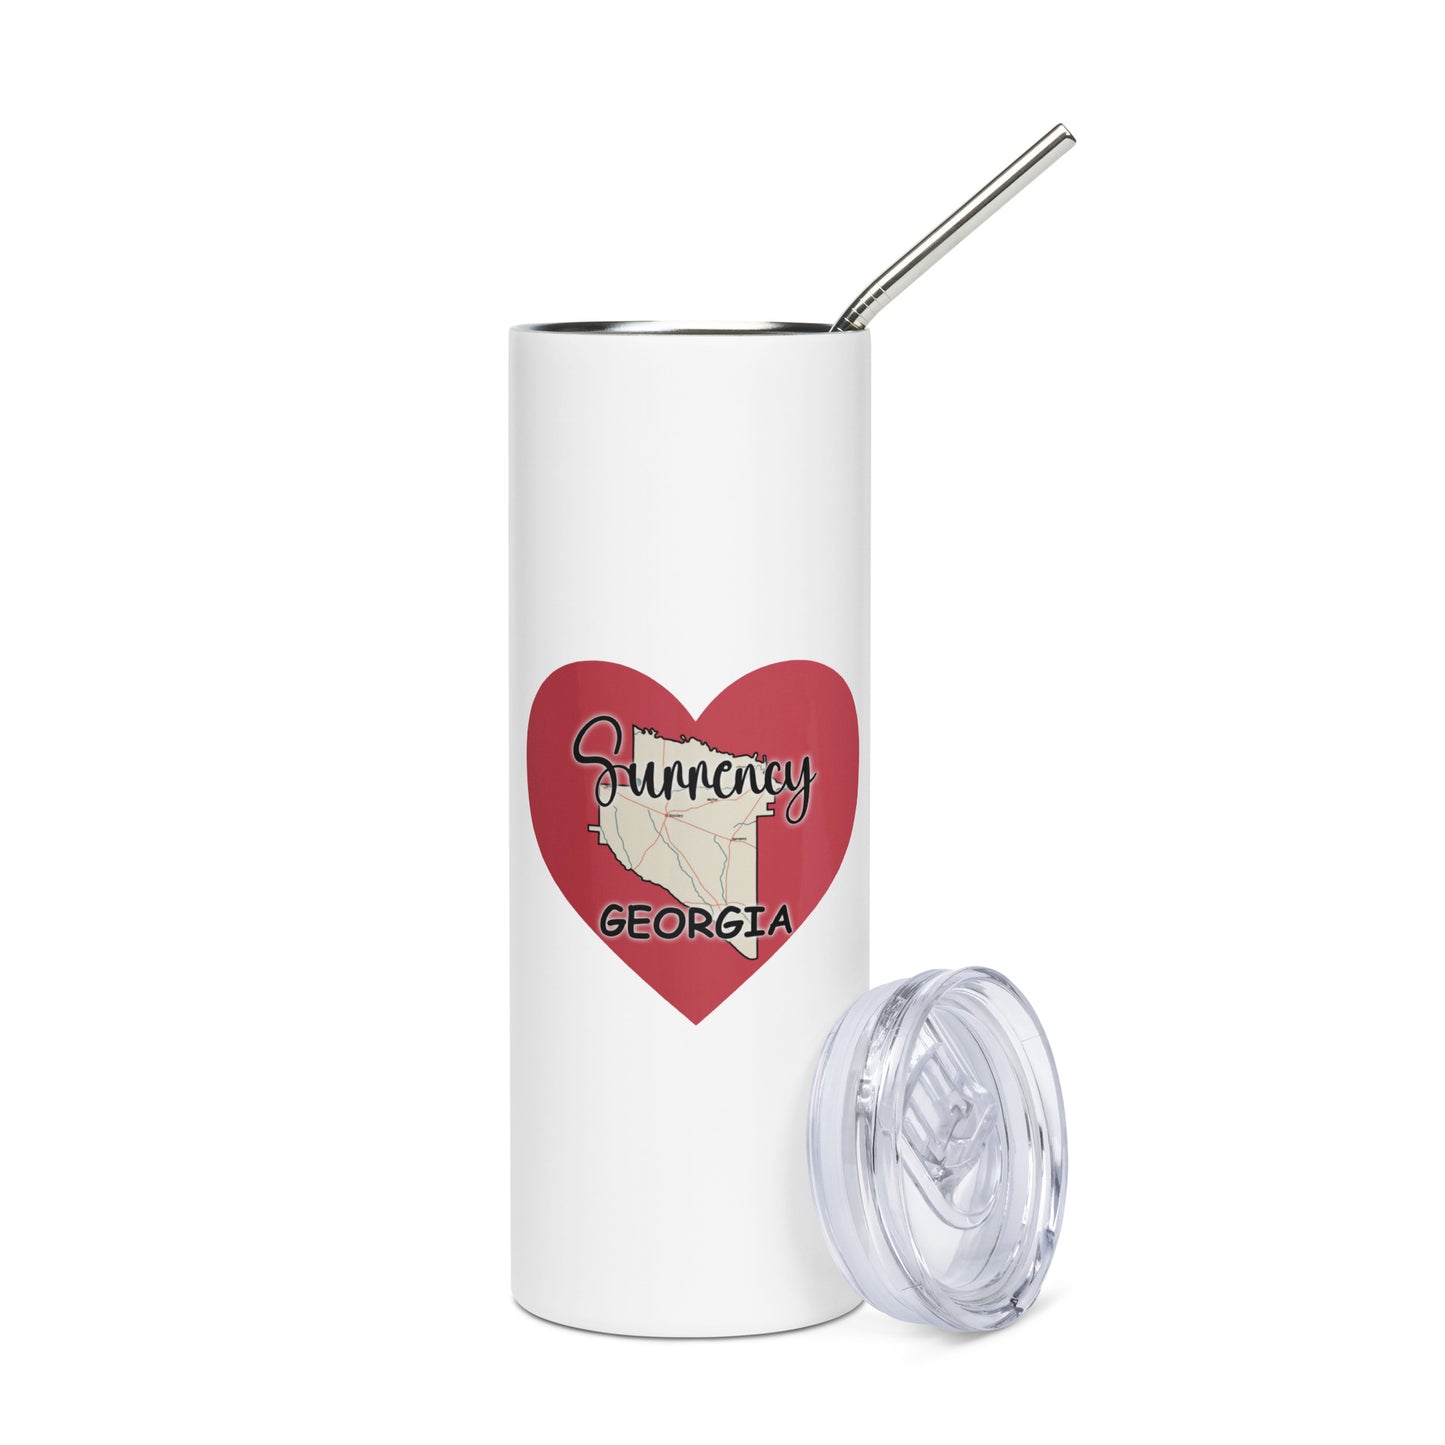 Surrency Georgia County on Large Heart Stainless Steel Tumbler with Straw 20 oz (600 ml)